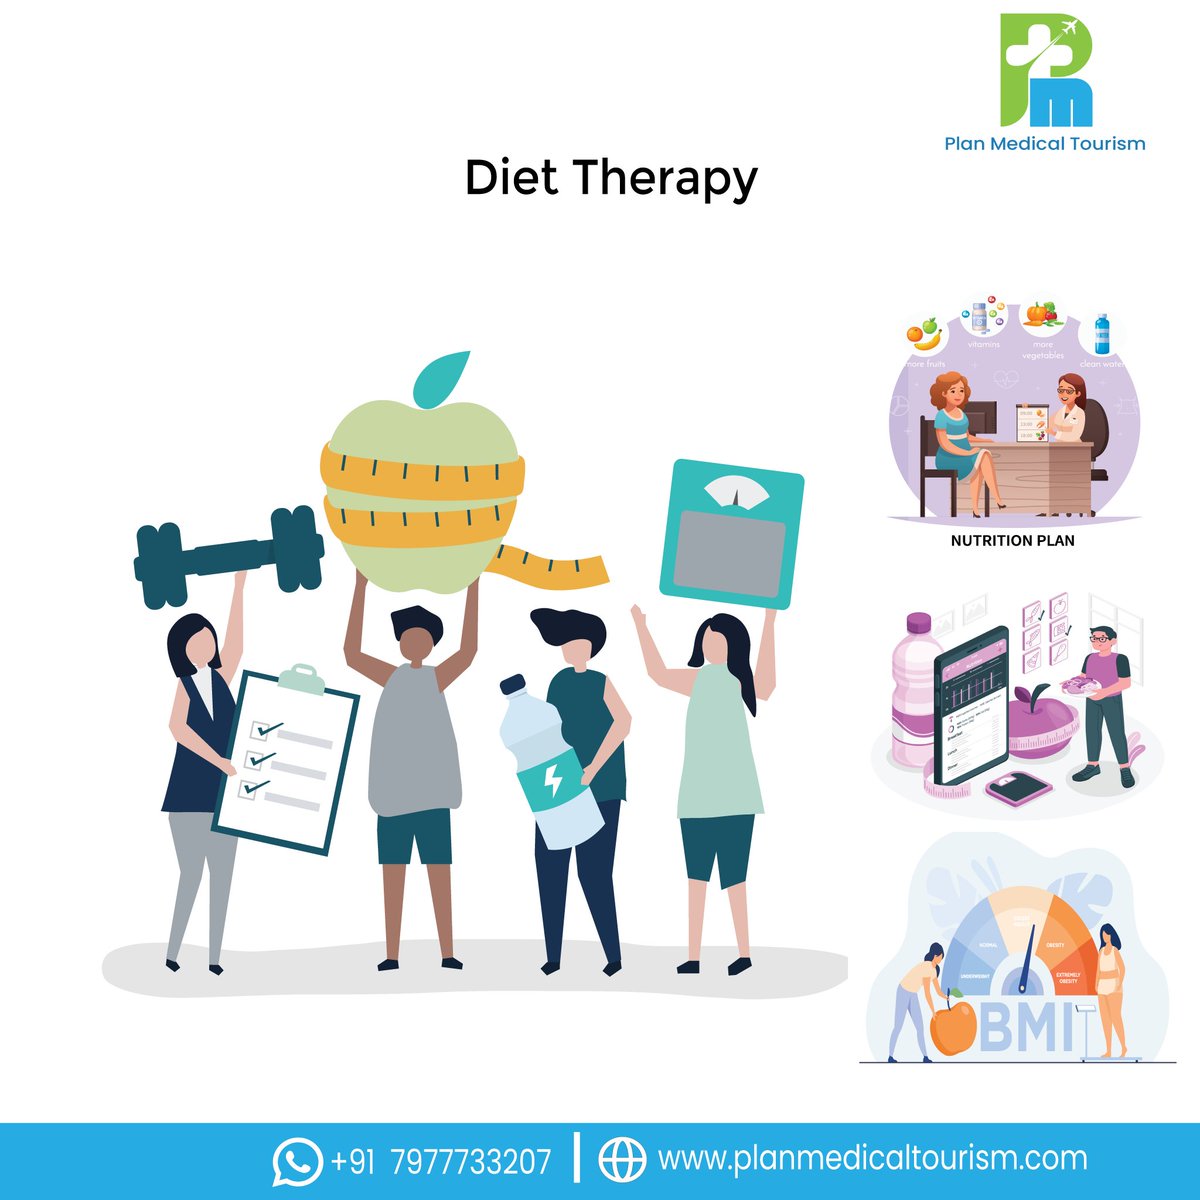 Diet Therapy
is a strategy for eating the food prescribed by a doctor to improve health and wellbeing. #DietTherapy #NutritionTherapy #HealthyEating
#WellnessDiet #EatWellBeWell #FoodAsMedicine
#NutritionHeals #PersonalizedDiet
#HealthThroughFood